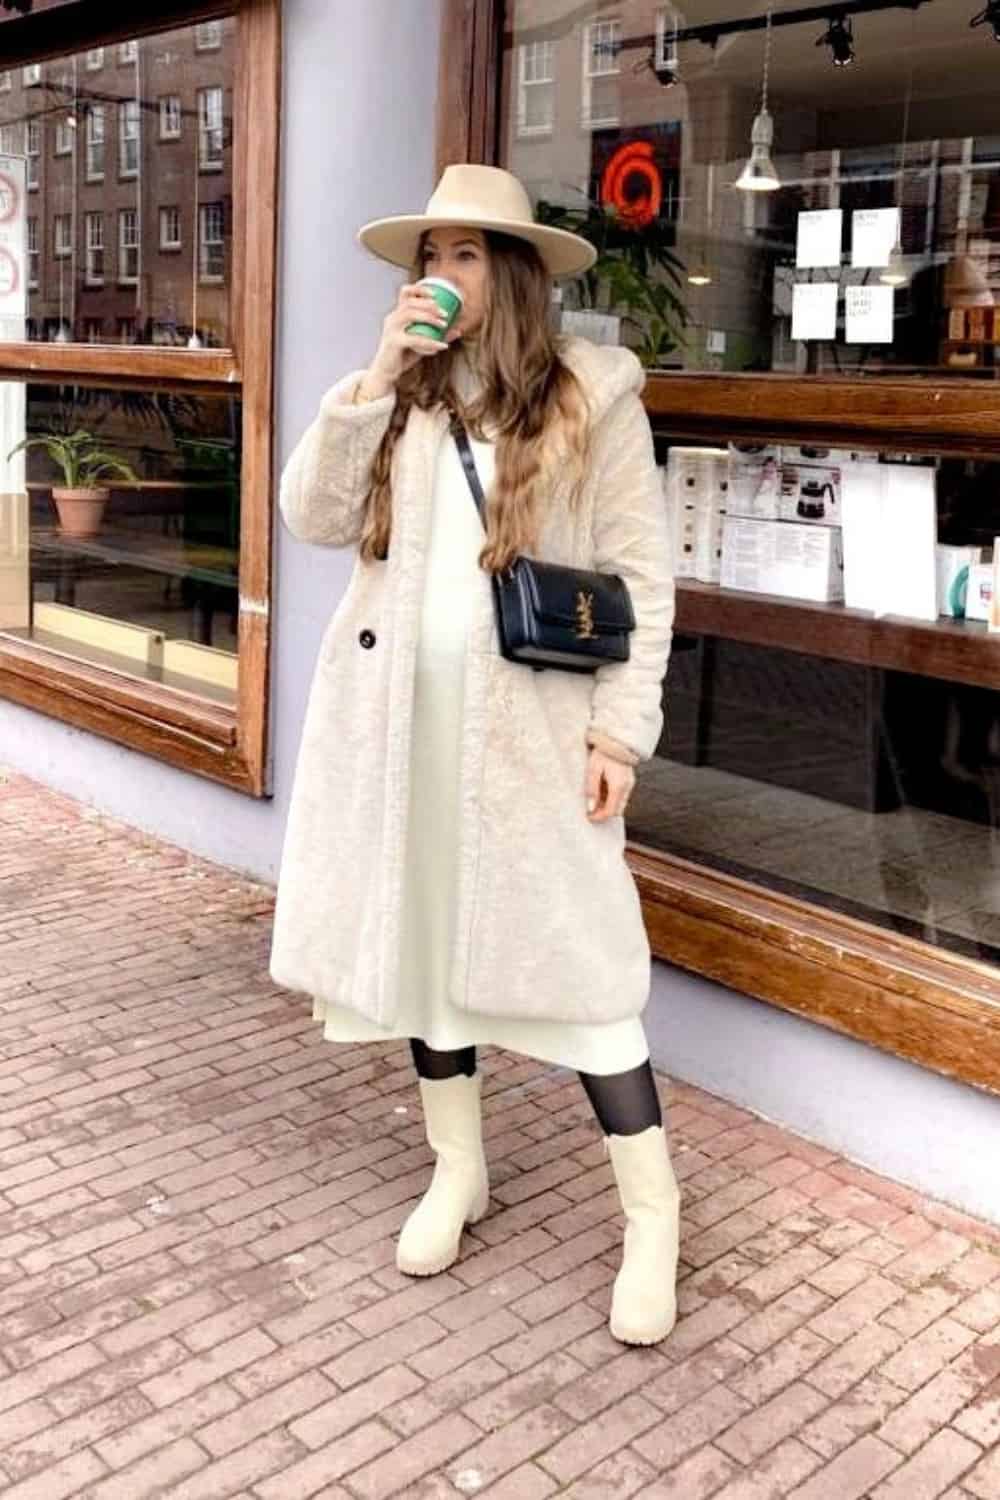 Fedora hat outfit with Knit Midi Dress, a Thick Matching Coat and Elegant Accessories